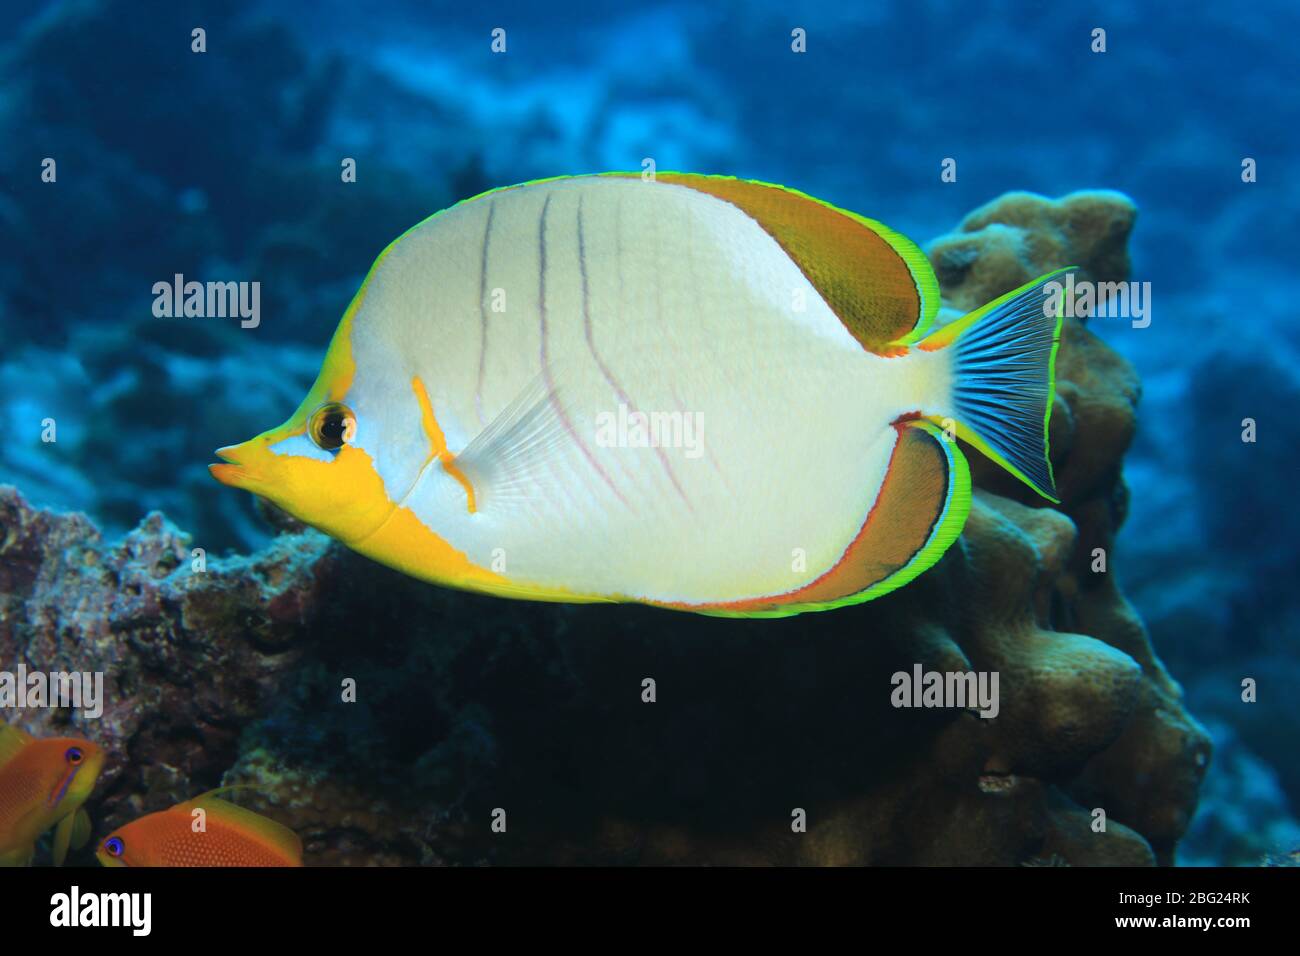 Yellowhead butterflyfish (Chaetodon xanthocephalus) underwater in the tropical coral reef of the Indian Ocean Stock Photo